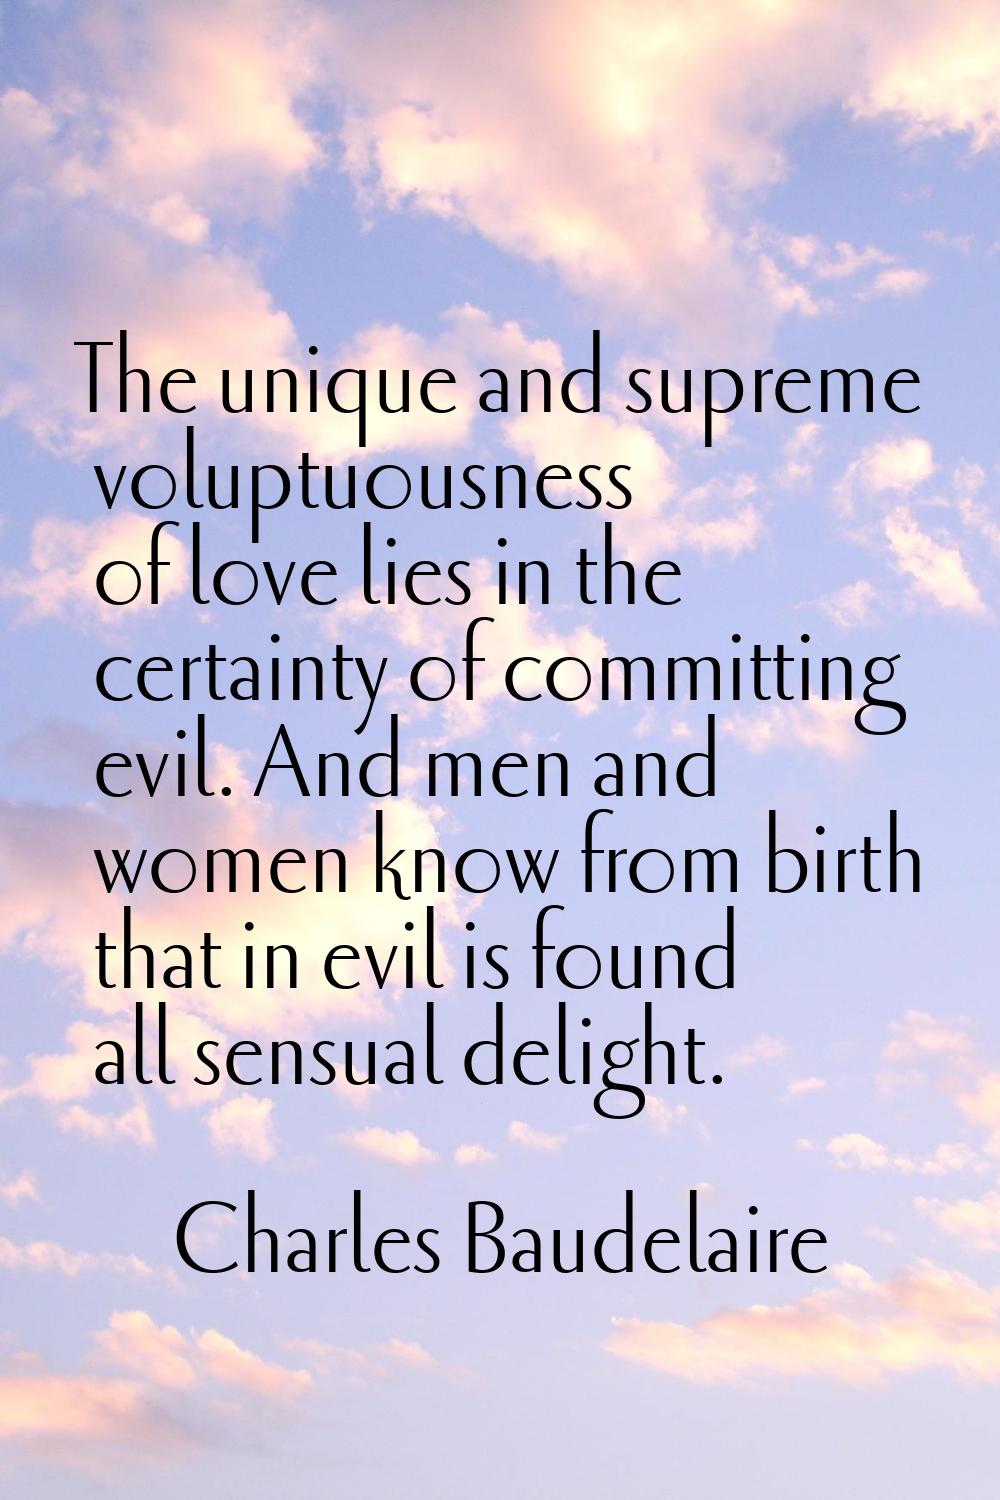 The unique and supreme voluptuousness of love lies in the certainty of committing evil. And men and